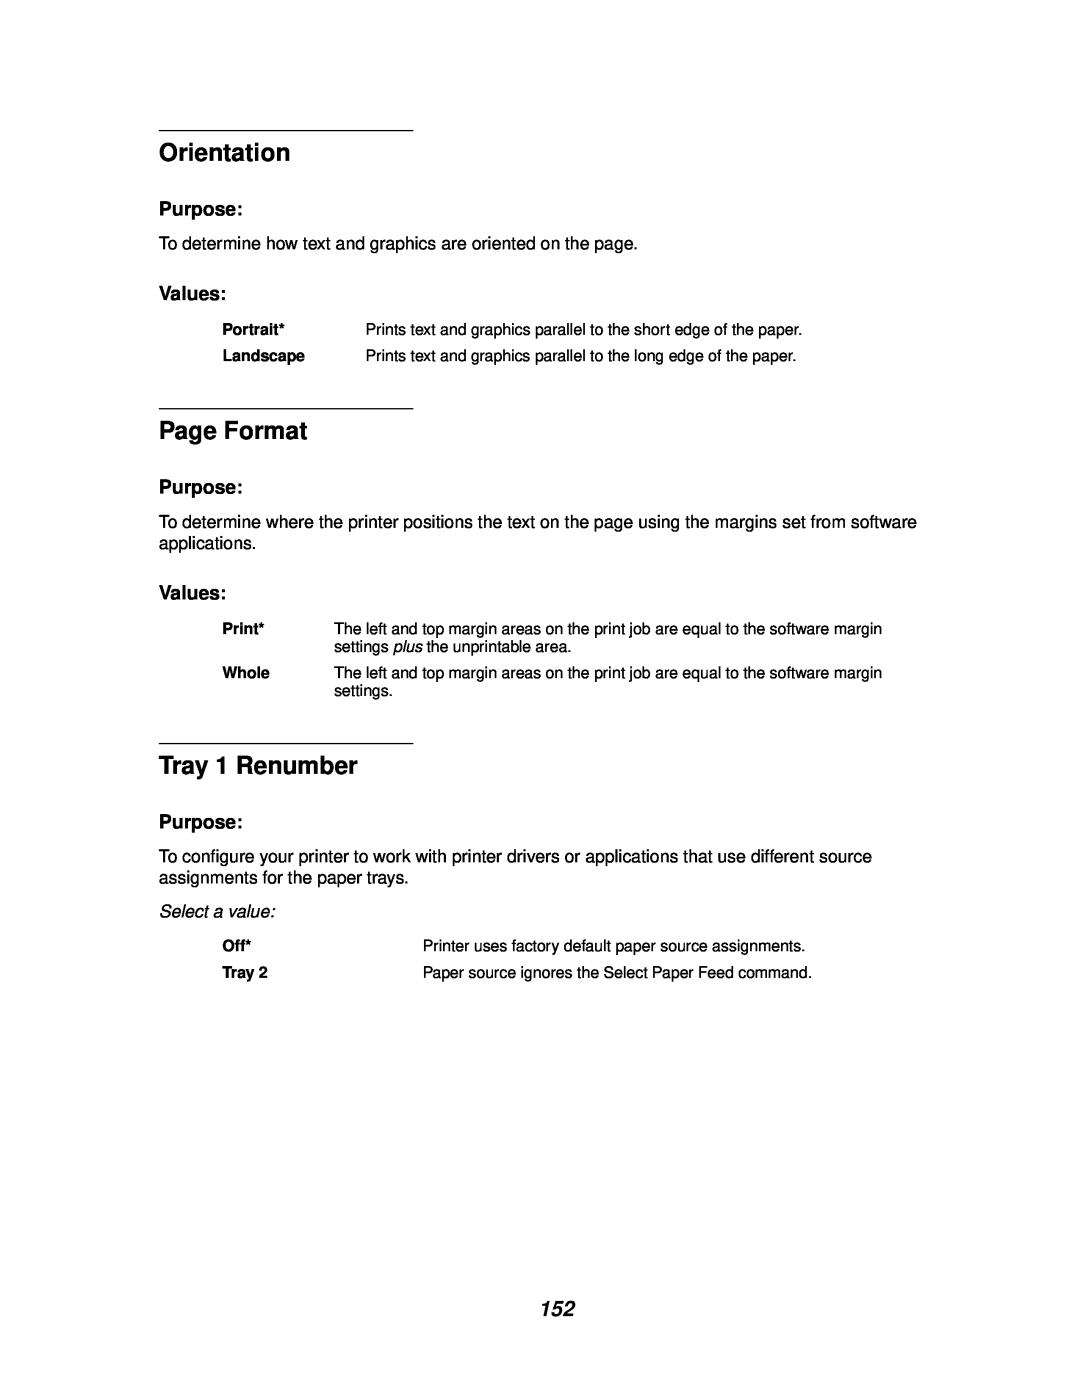 Lexmark 812 manual Page Format, Tray 1 Renumber, Orientation, Purpose, Values, Select a value 